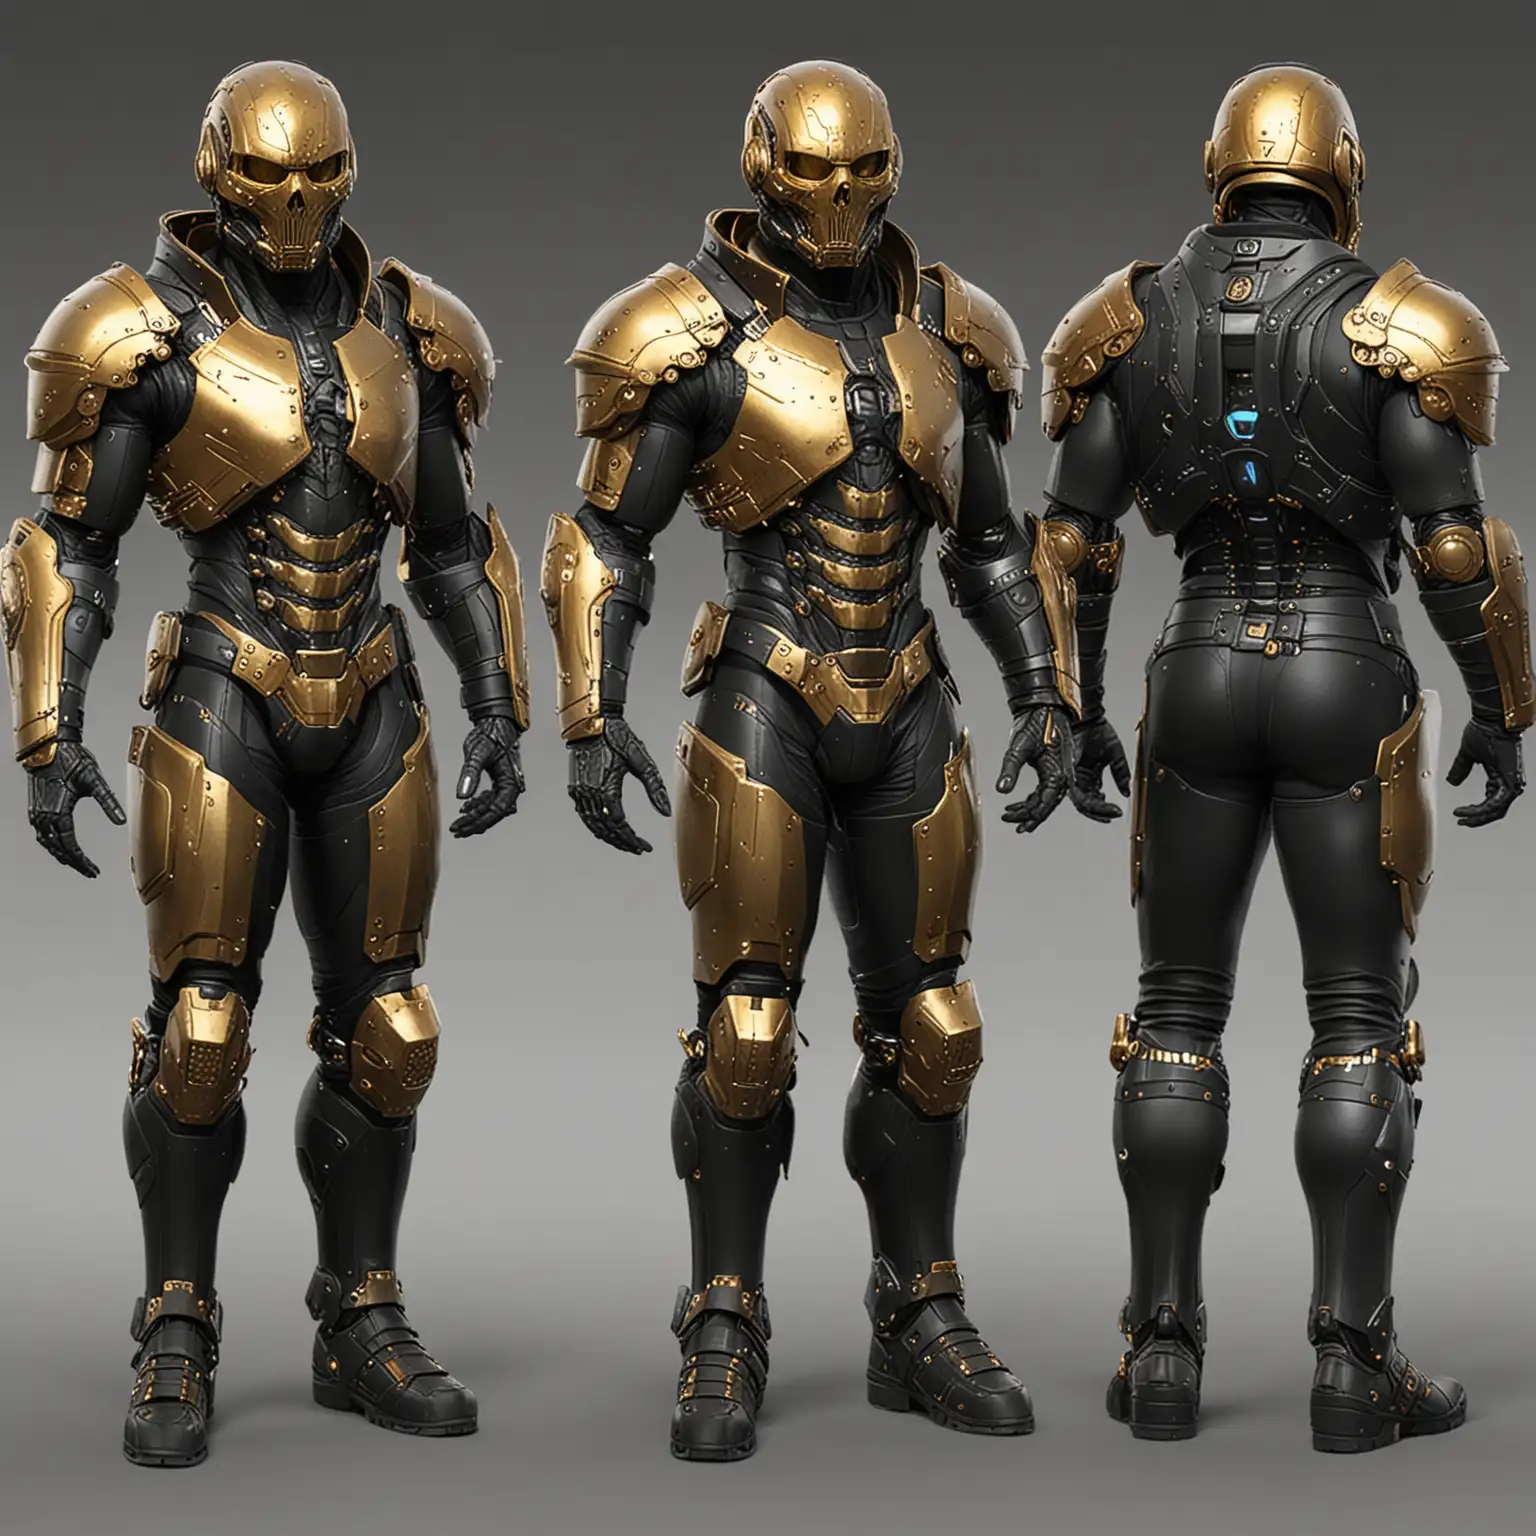 Futuristic Soldier with Skull Symbolism and Golden Deathmask Armor